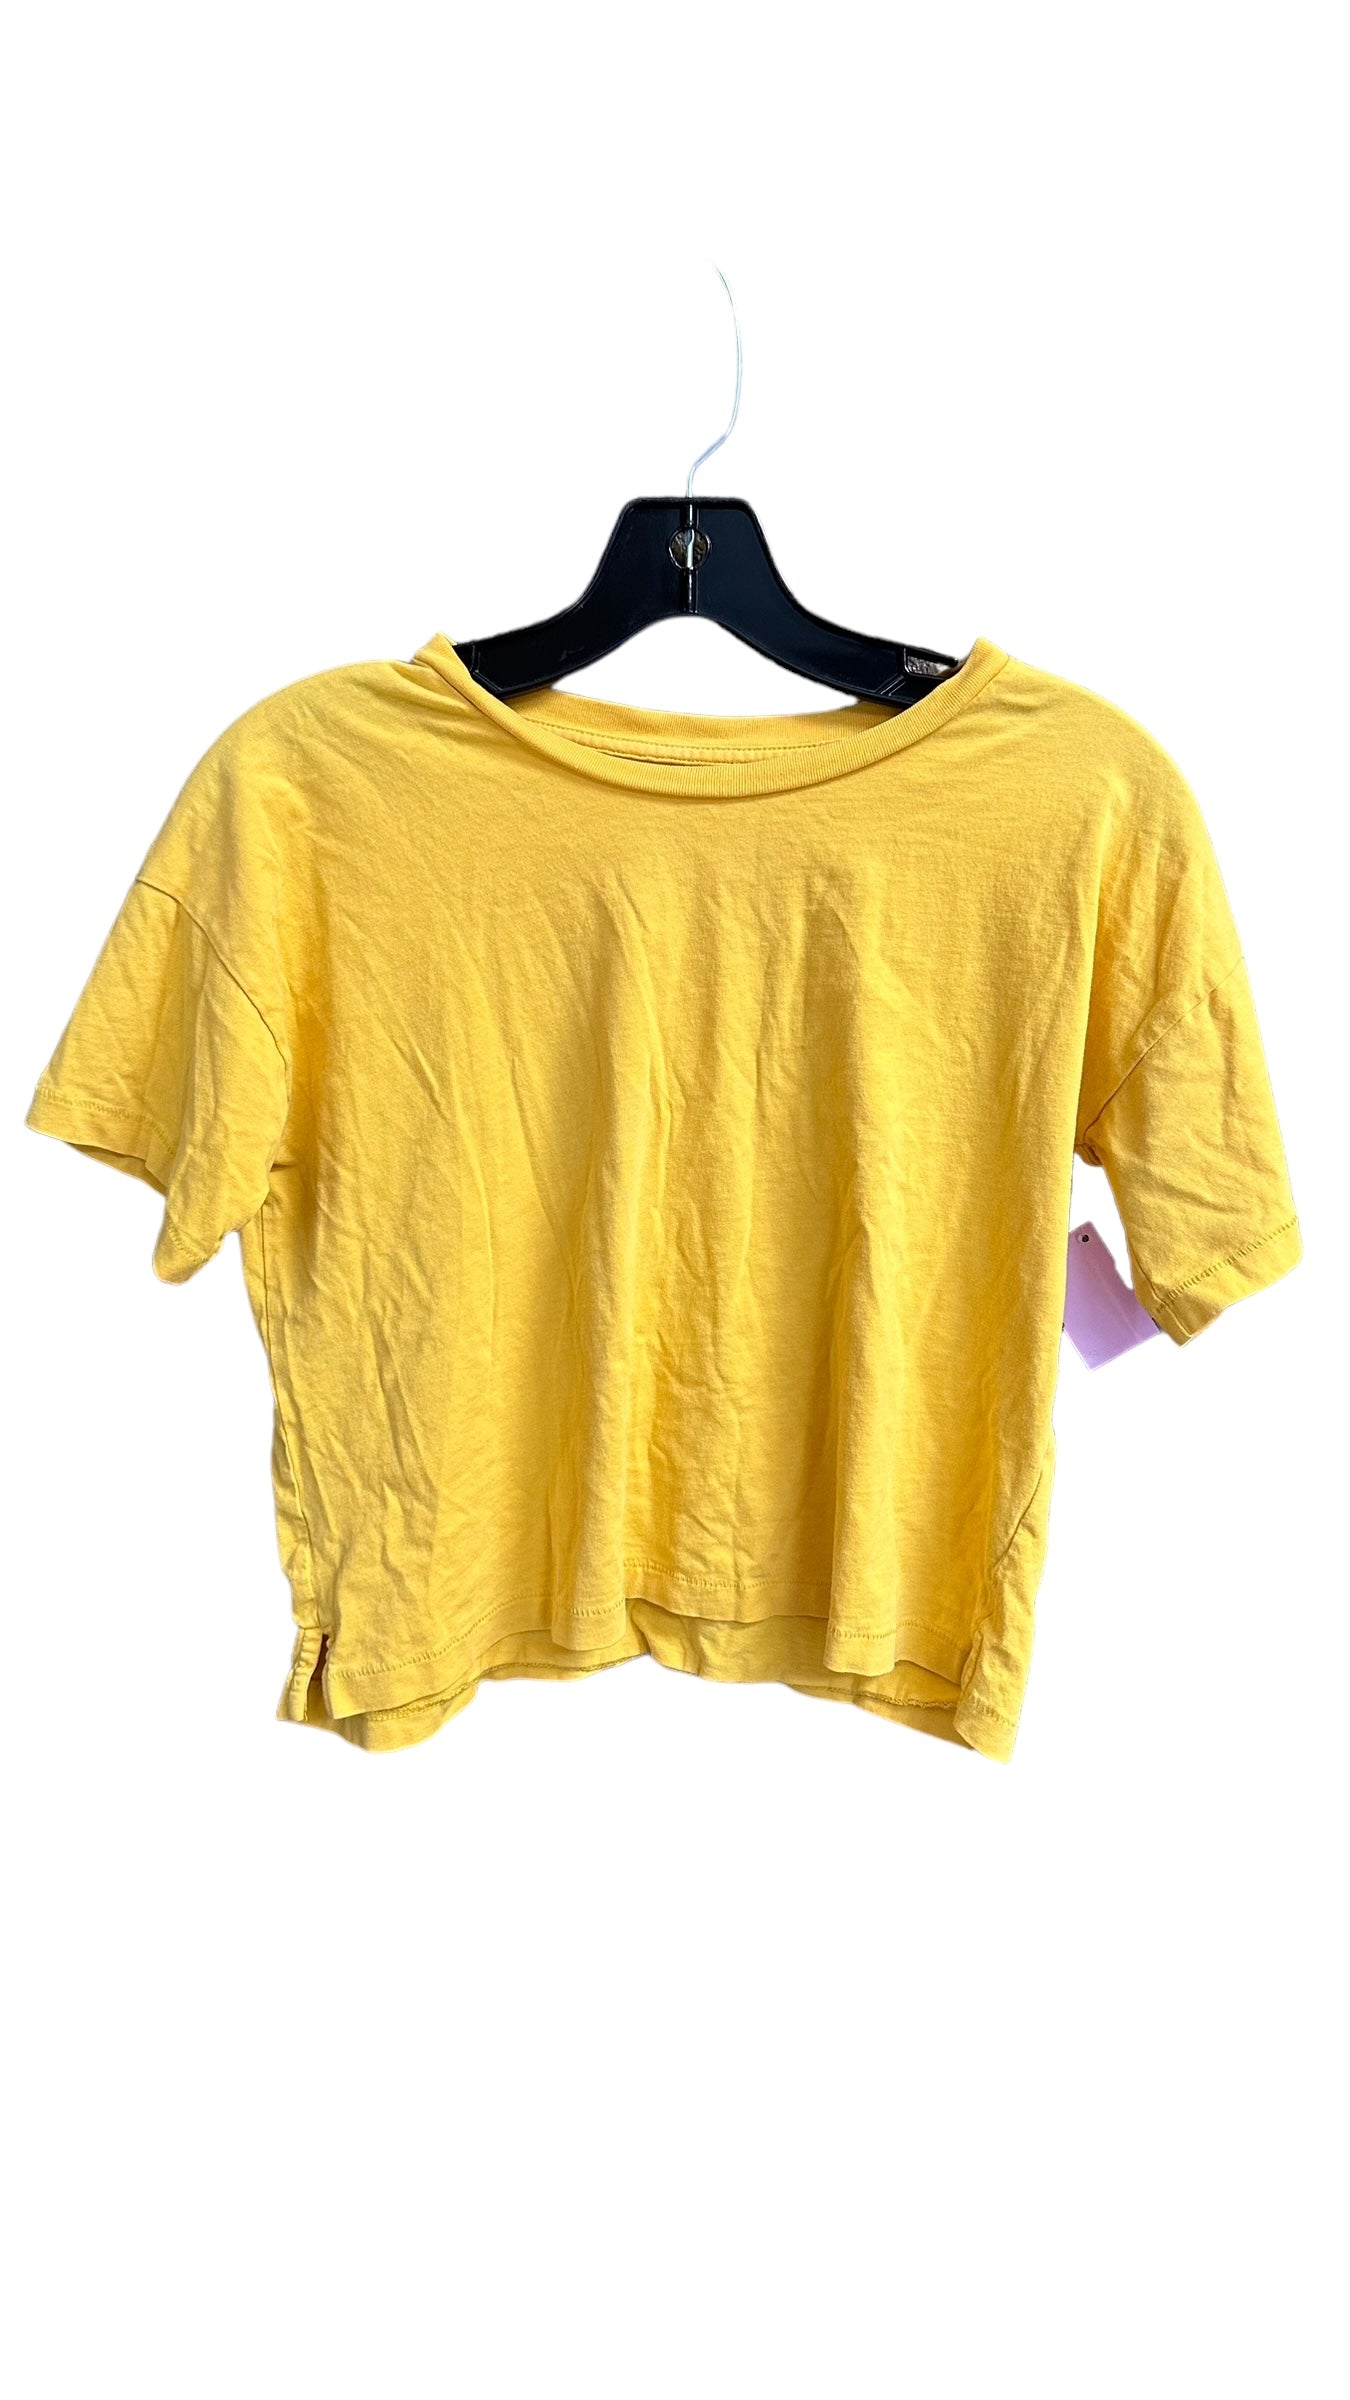 Yellow Top Short Sleeve Madewell, Size Xs